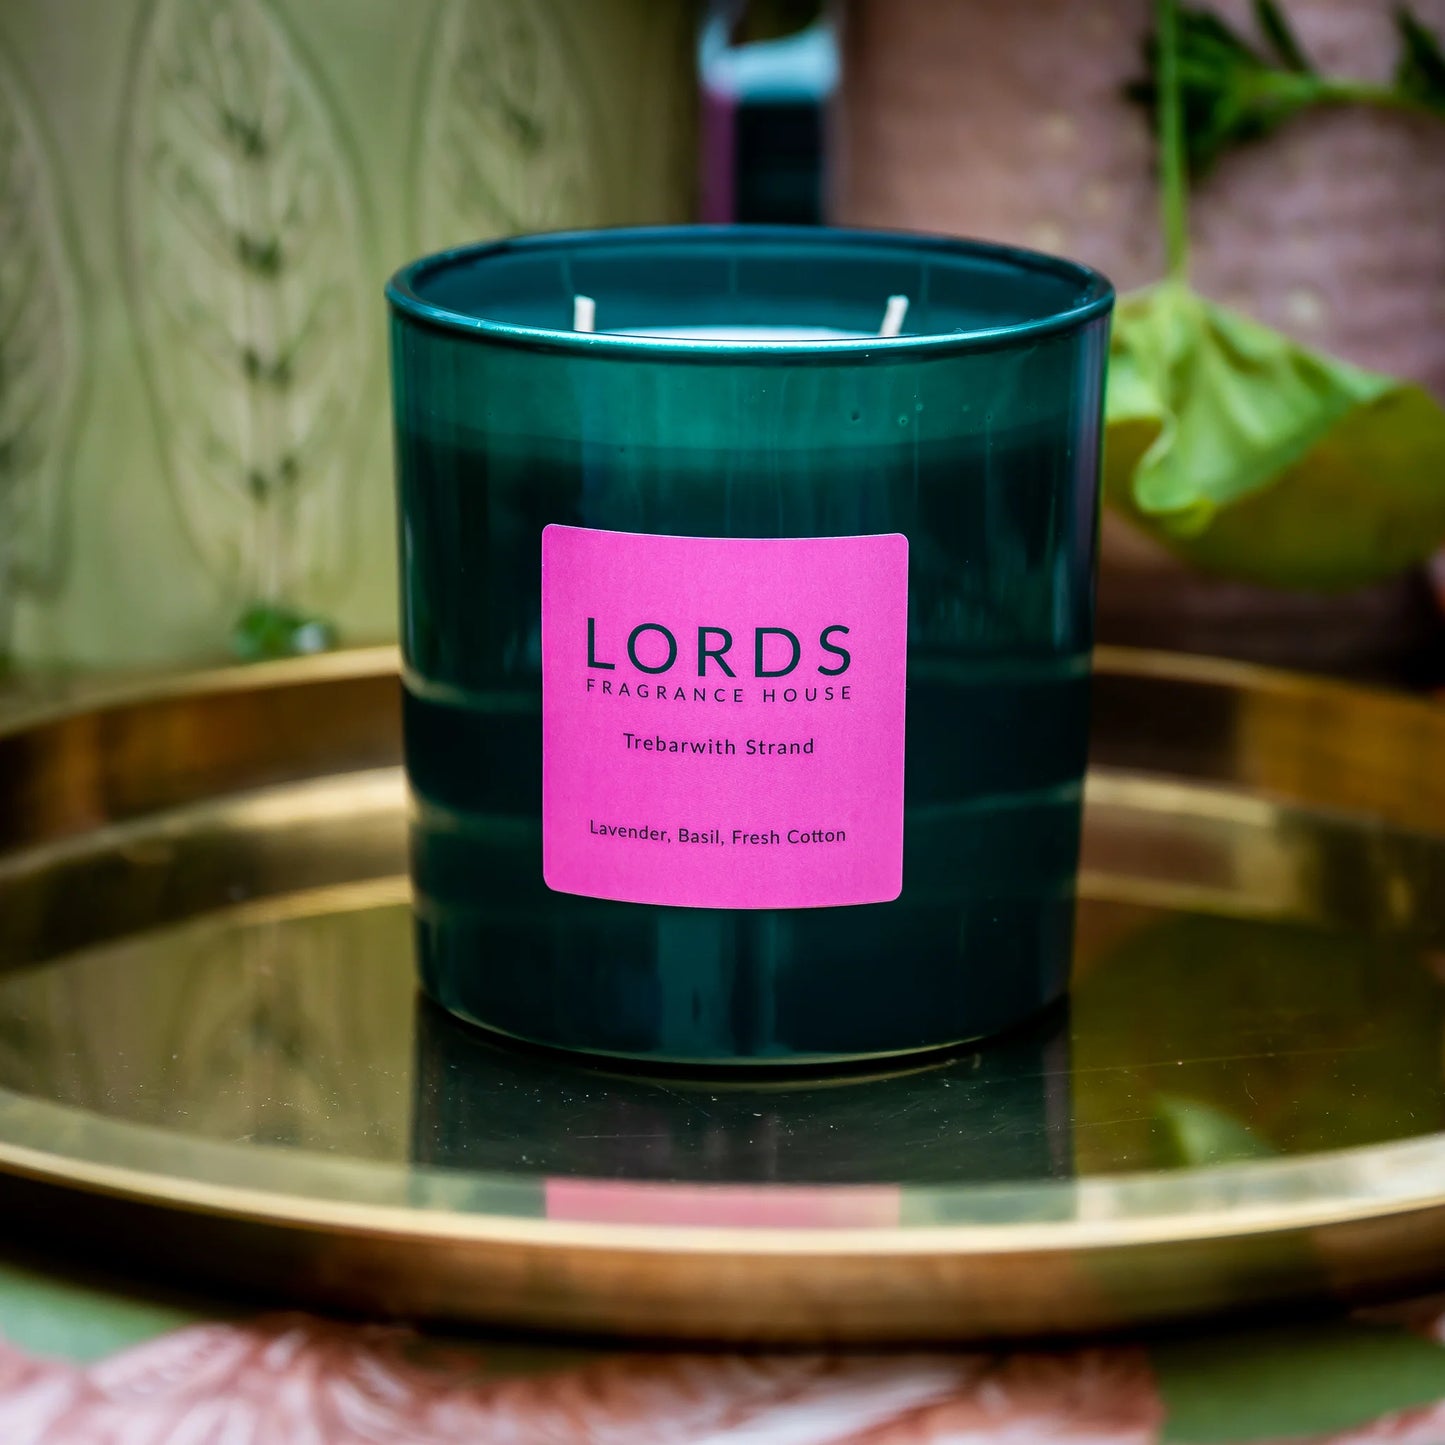 large 650g Lords fragranced 3 wick candles in various fragrances